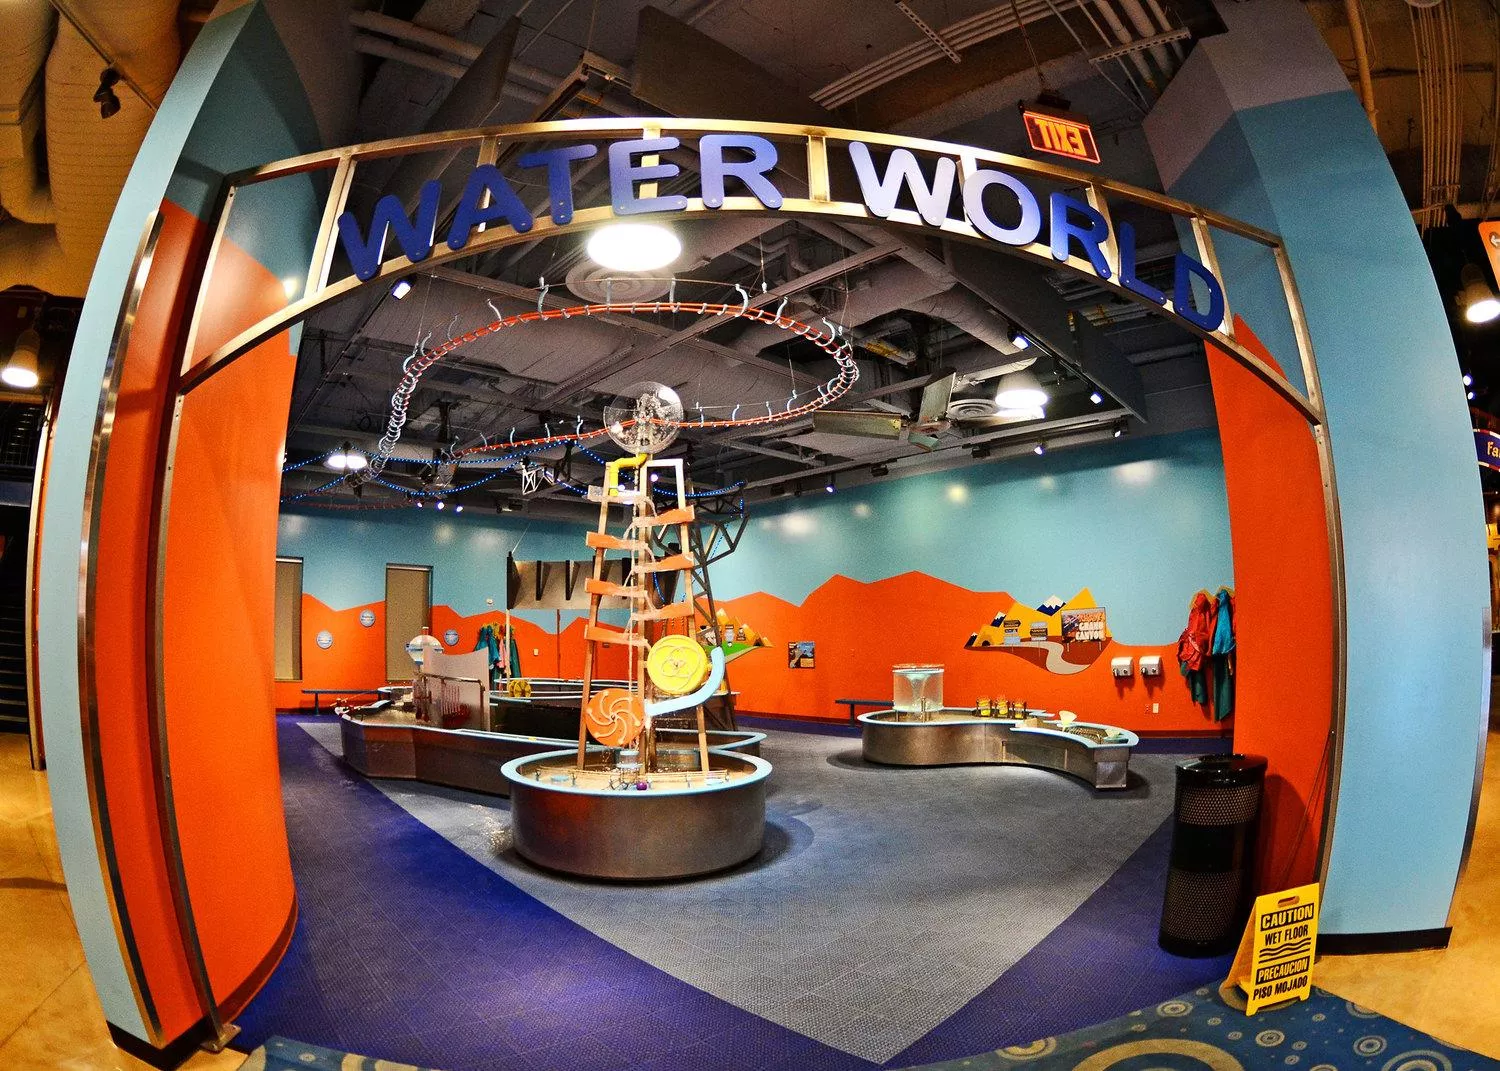 Lead Discovery Children's Museum in USA, North America | Museums - Rated 3.9